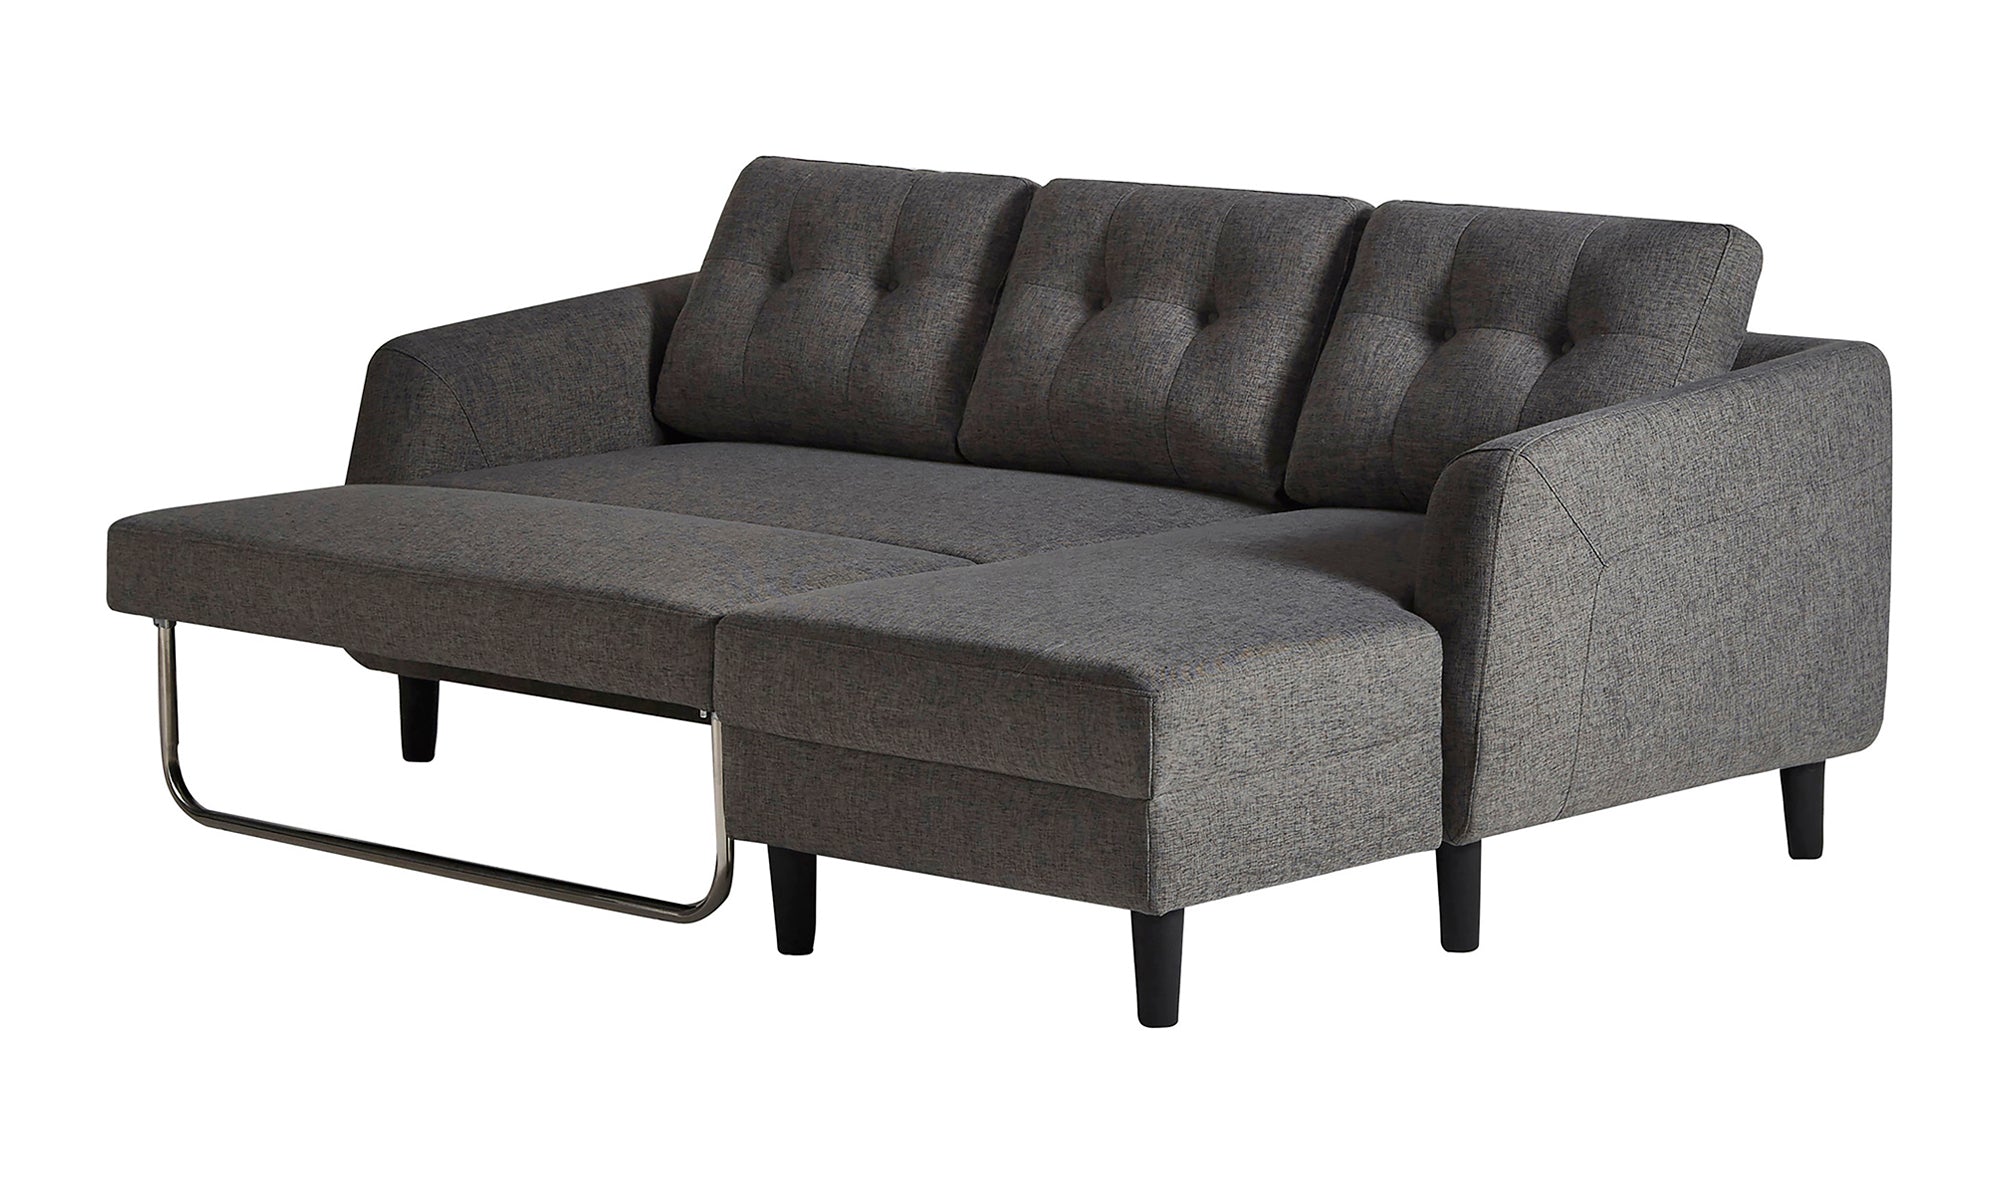 Belagio Right Facing Sofa Bed With Chaise - Charcoal Grey